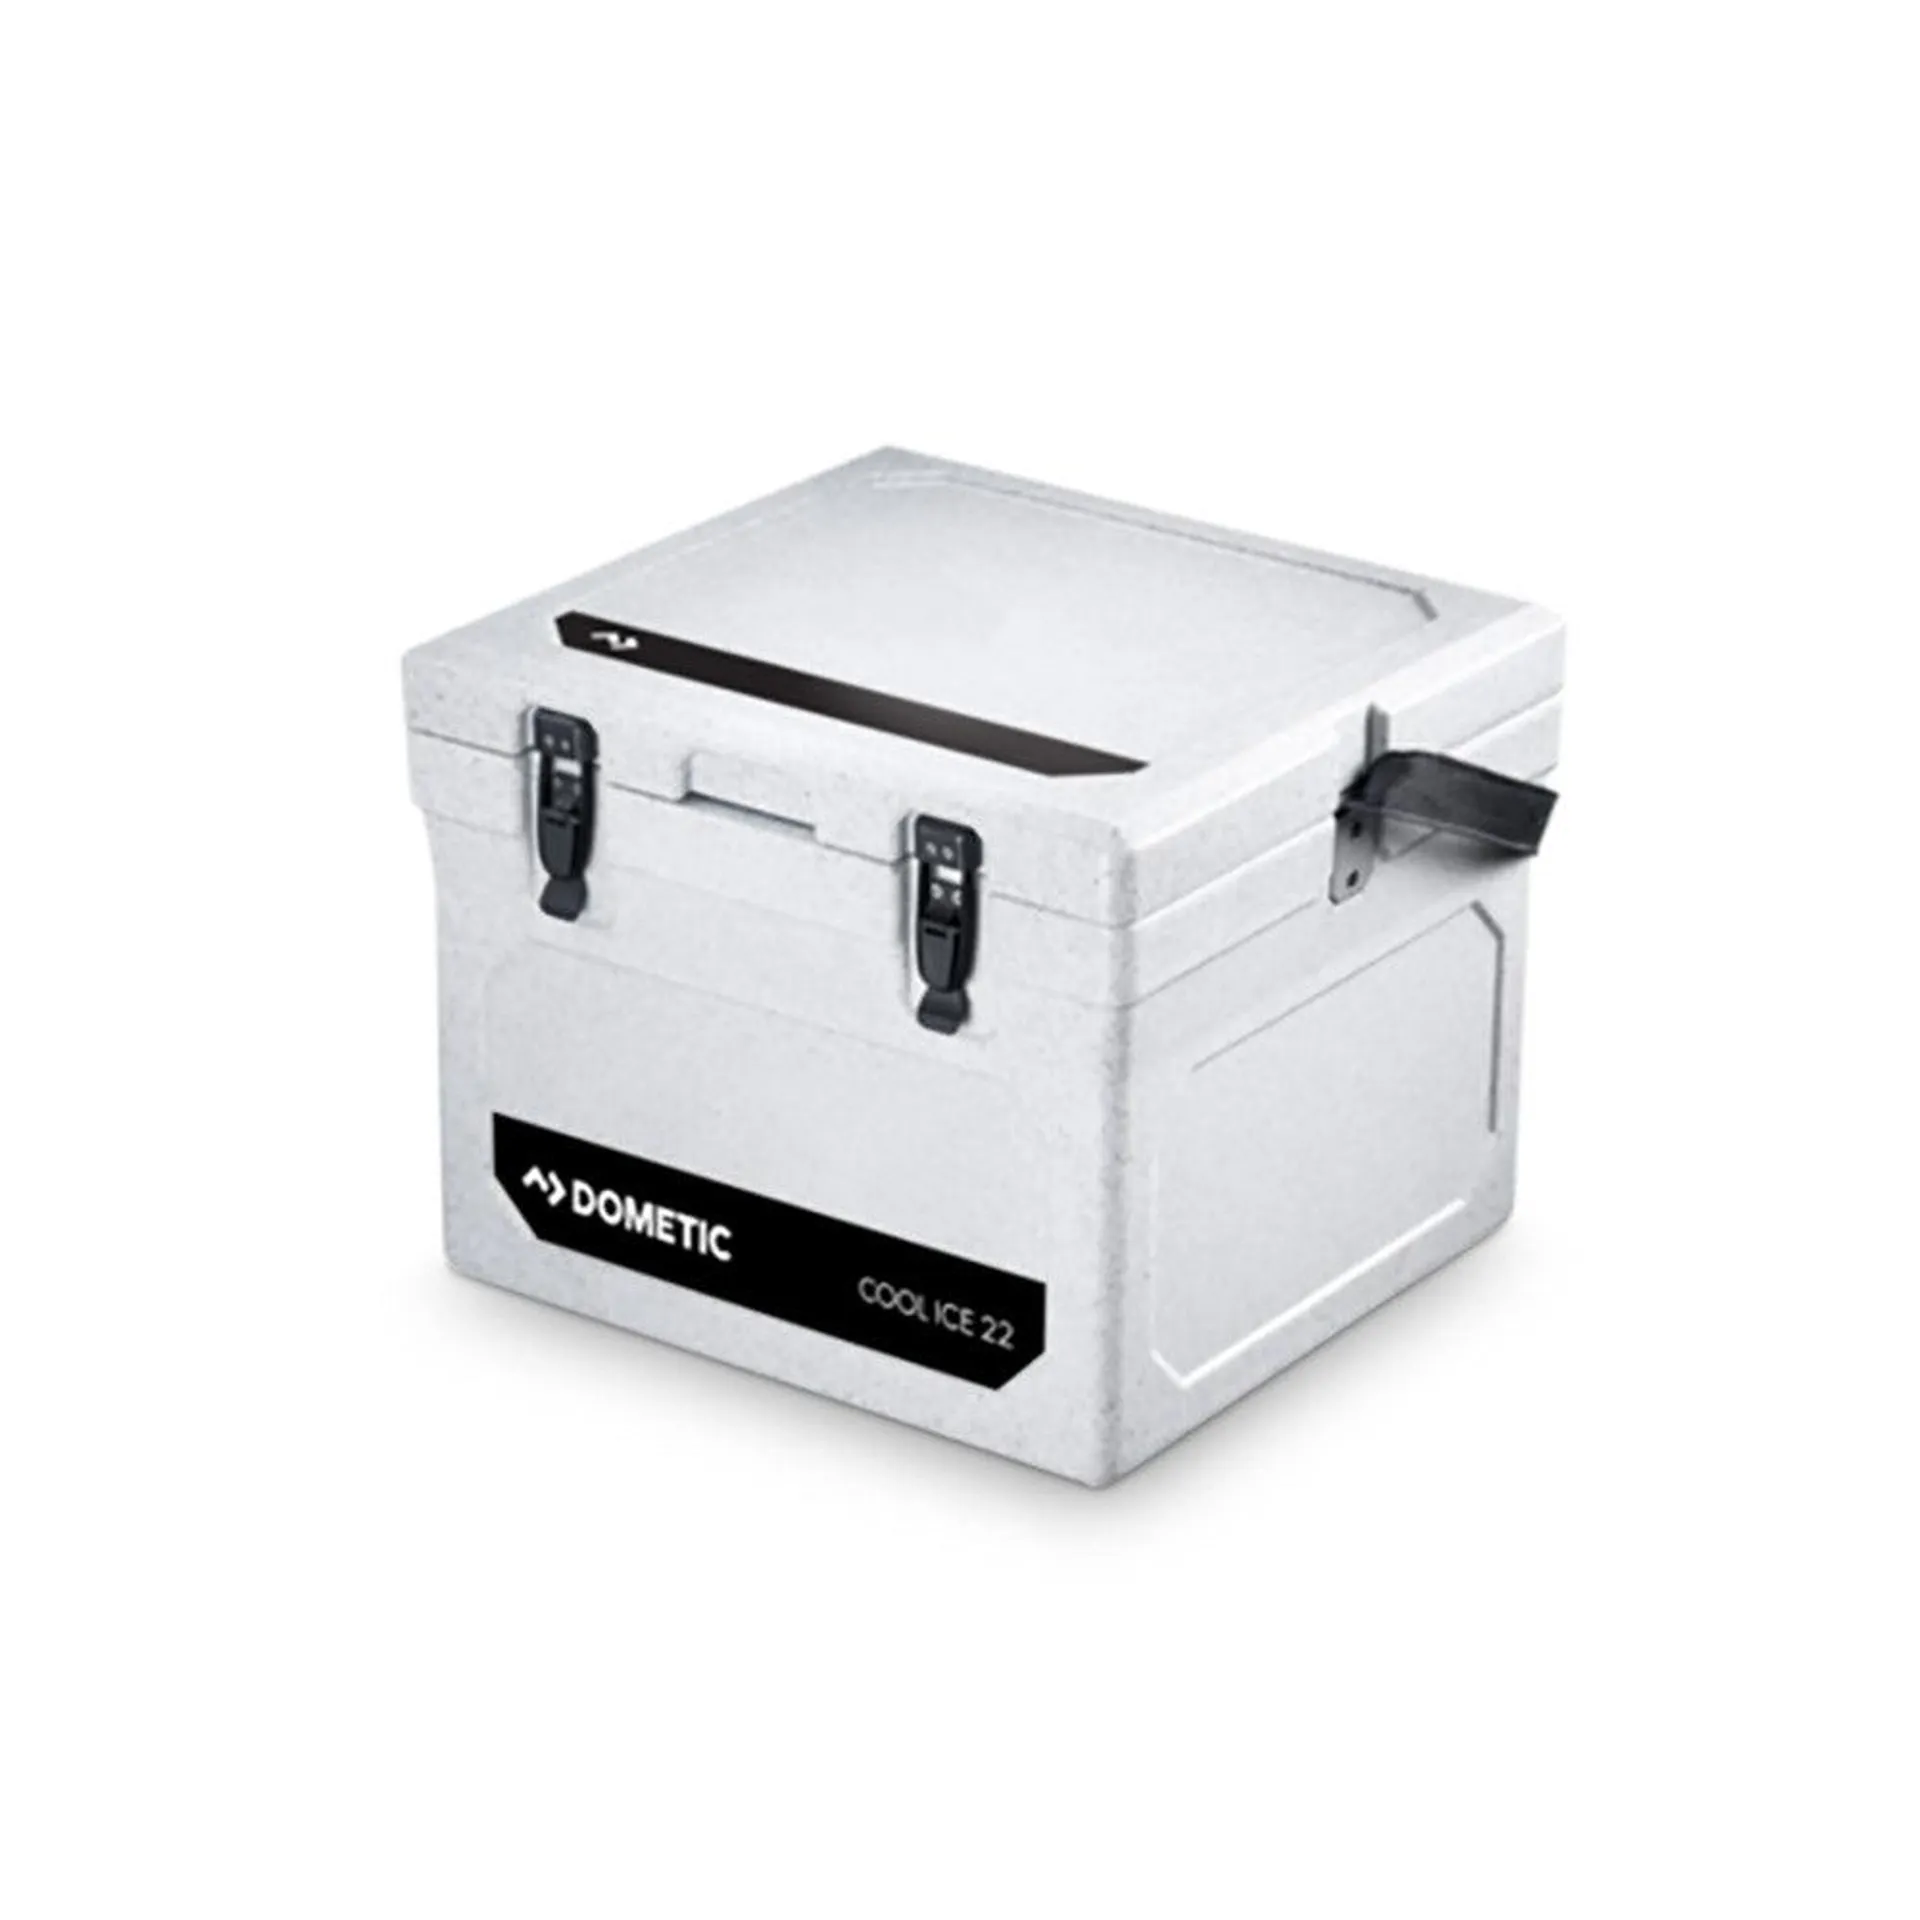 Dometic Cool-Ice Heavy Duty Cooler Box 22L